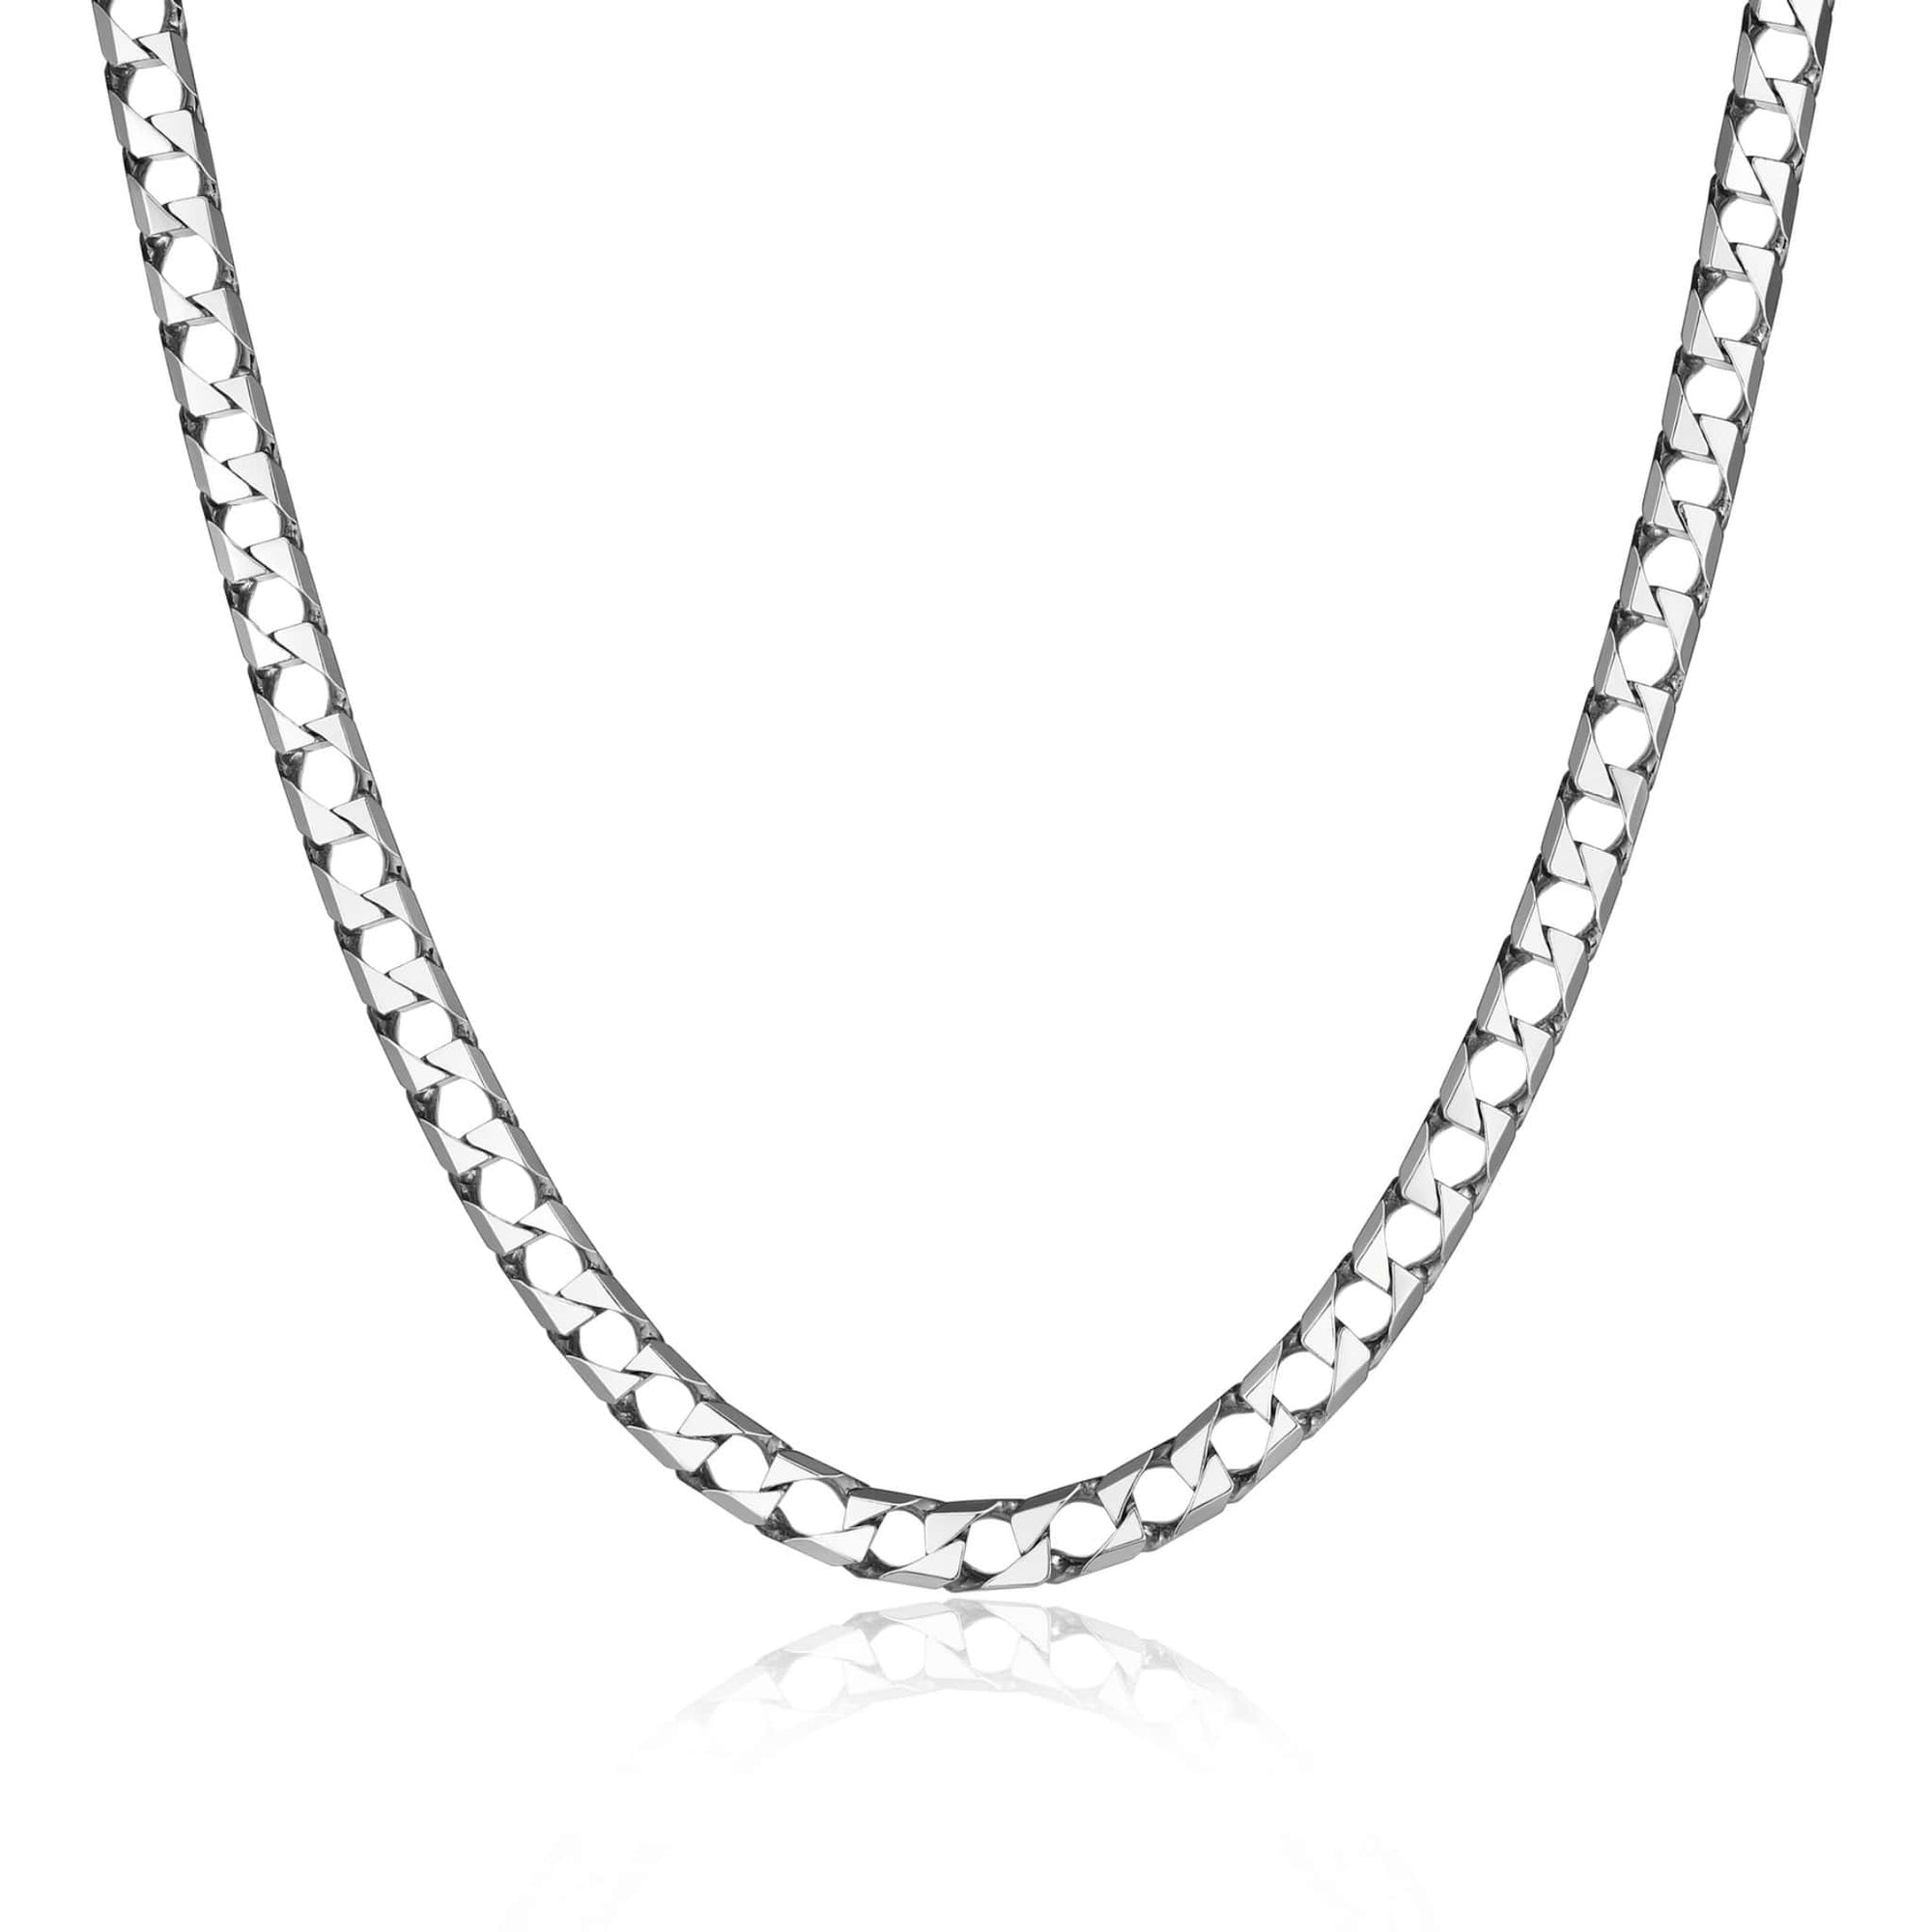 ETHOS Silver Curb Chain Necklace at Arman's Jewellers Kitchener Waterloo